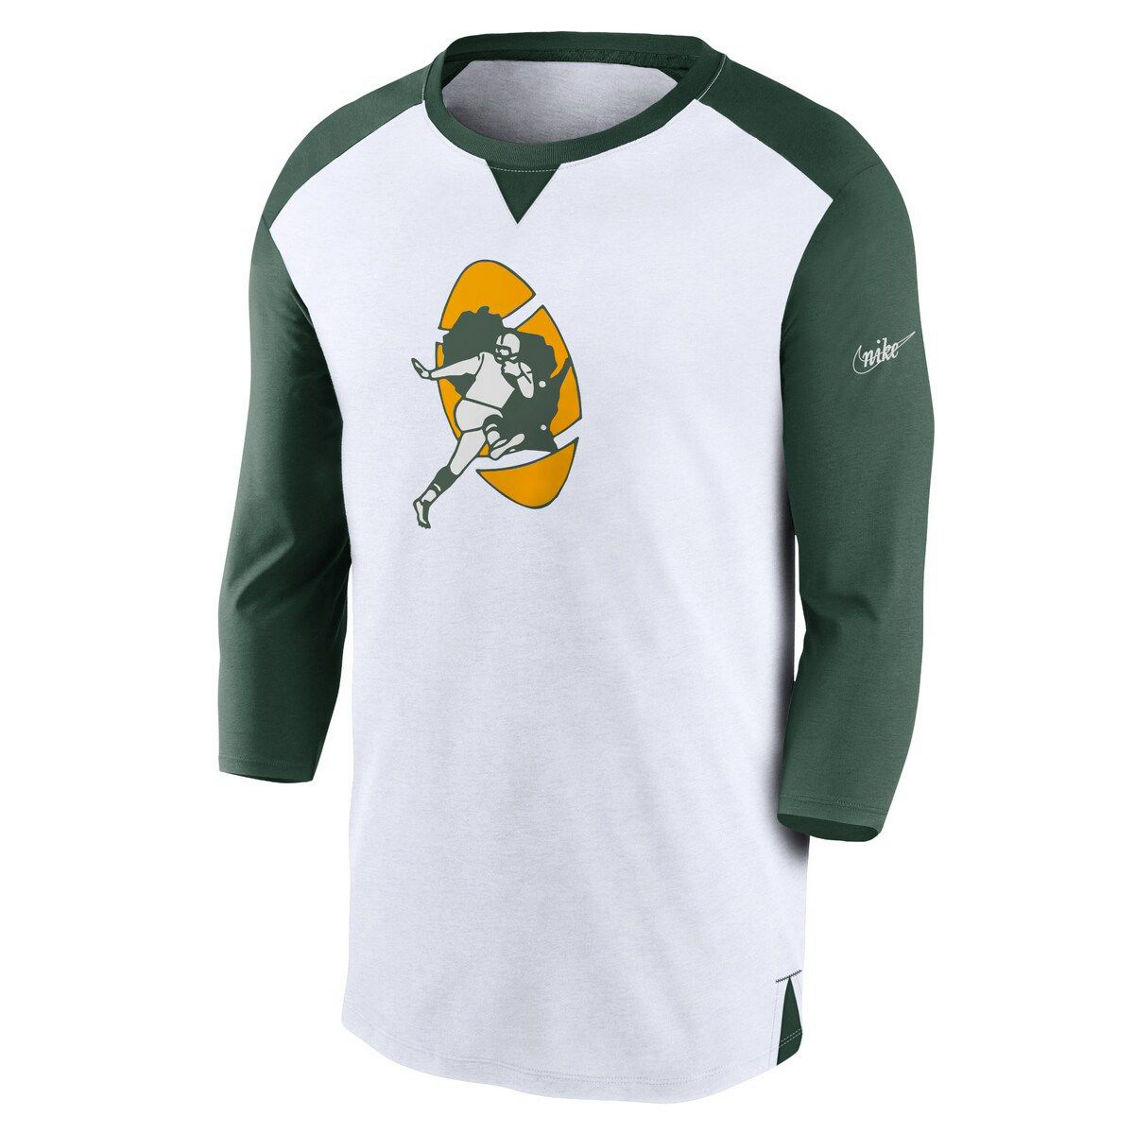 Nike Men's White/Green Green Bay Packers Rewind 3/4-Sleeve T-Shirt - Image 3 of 4